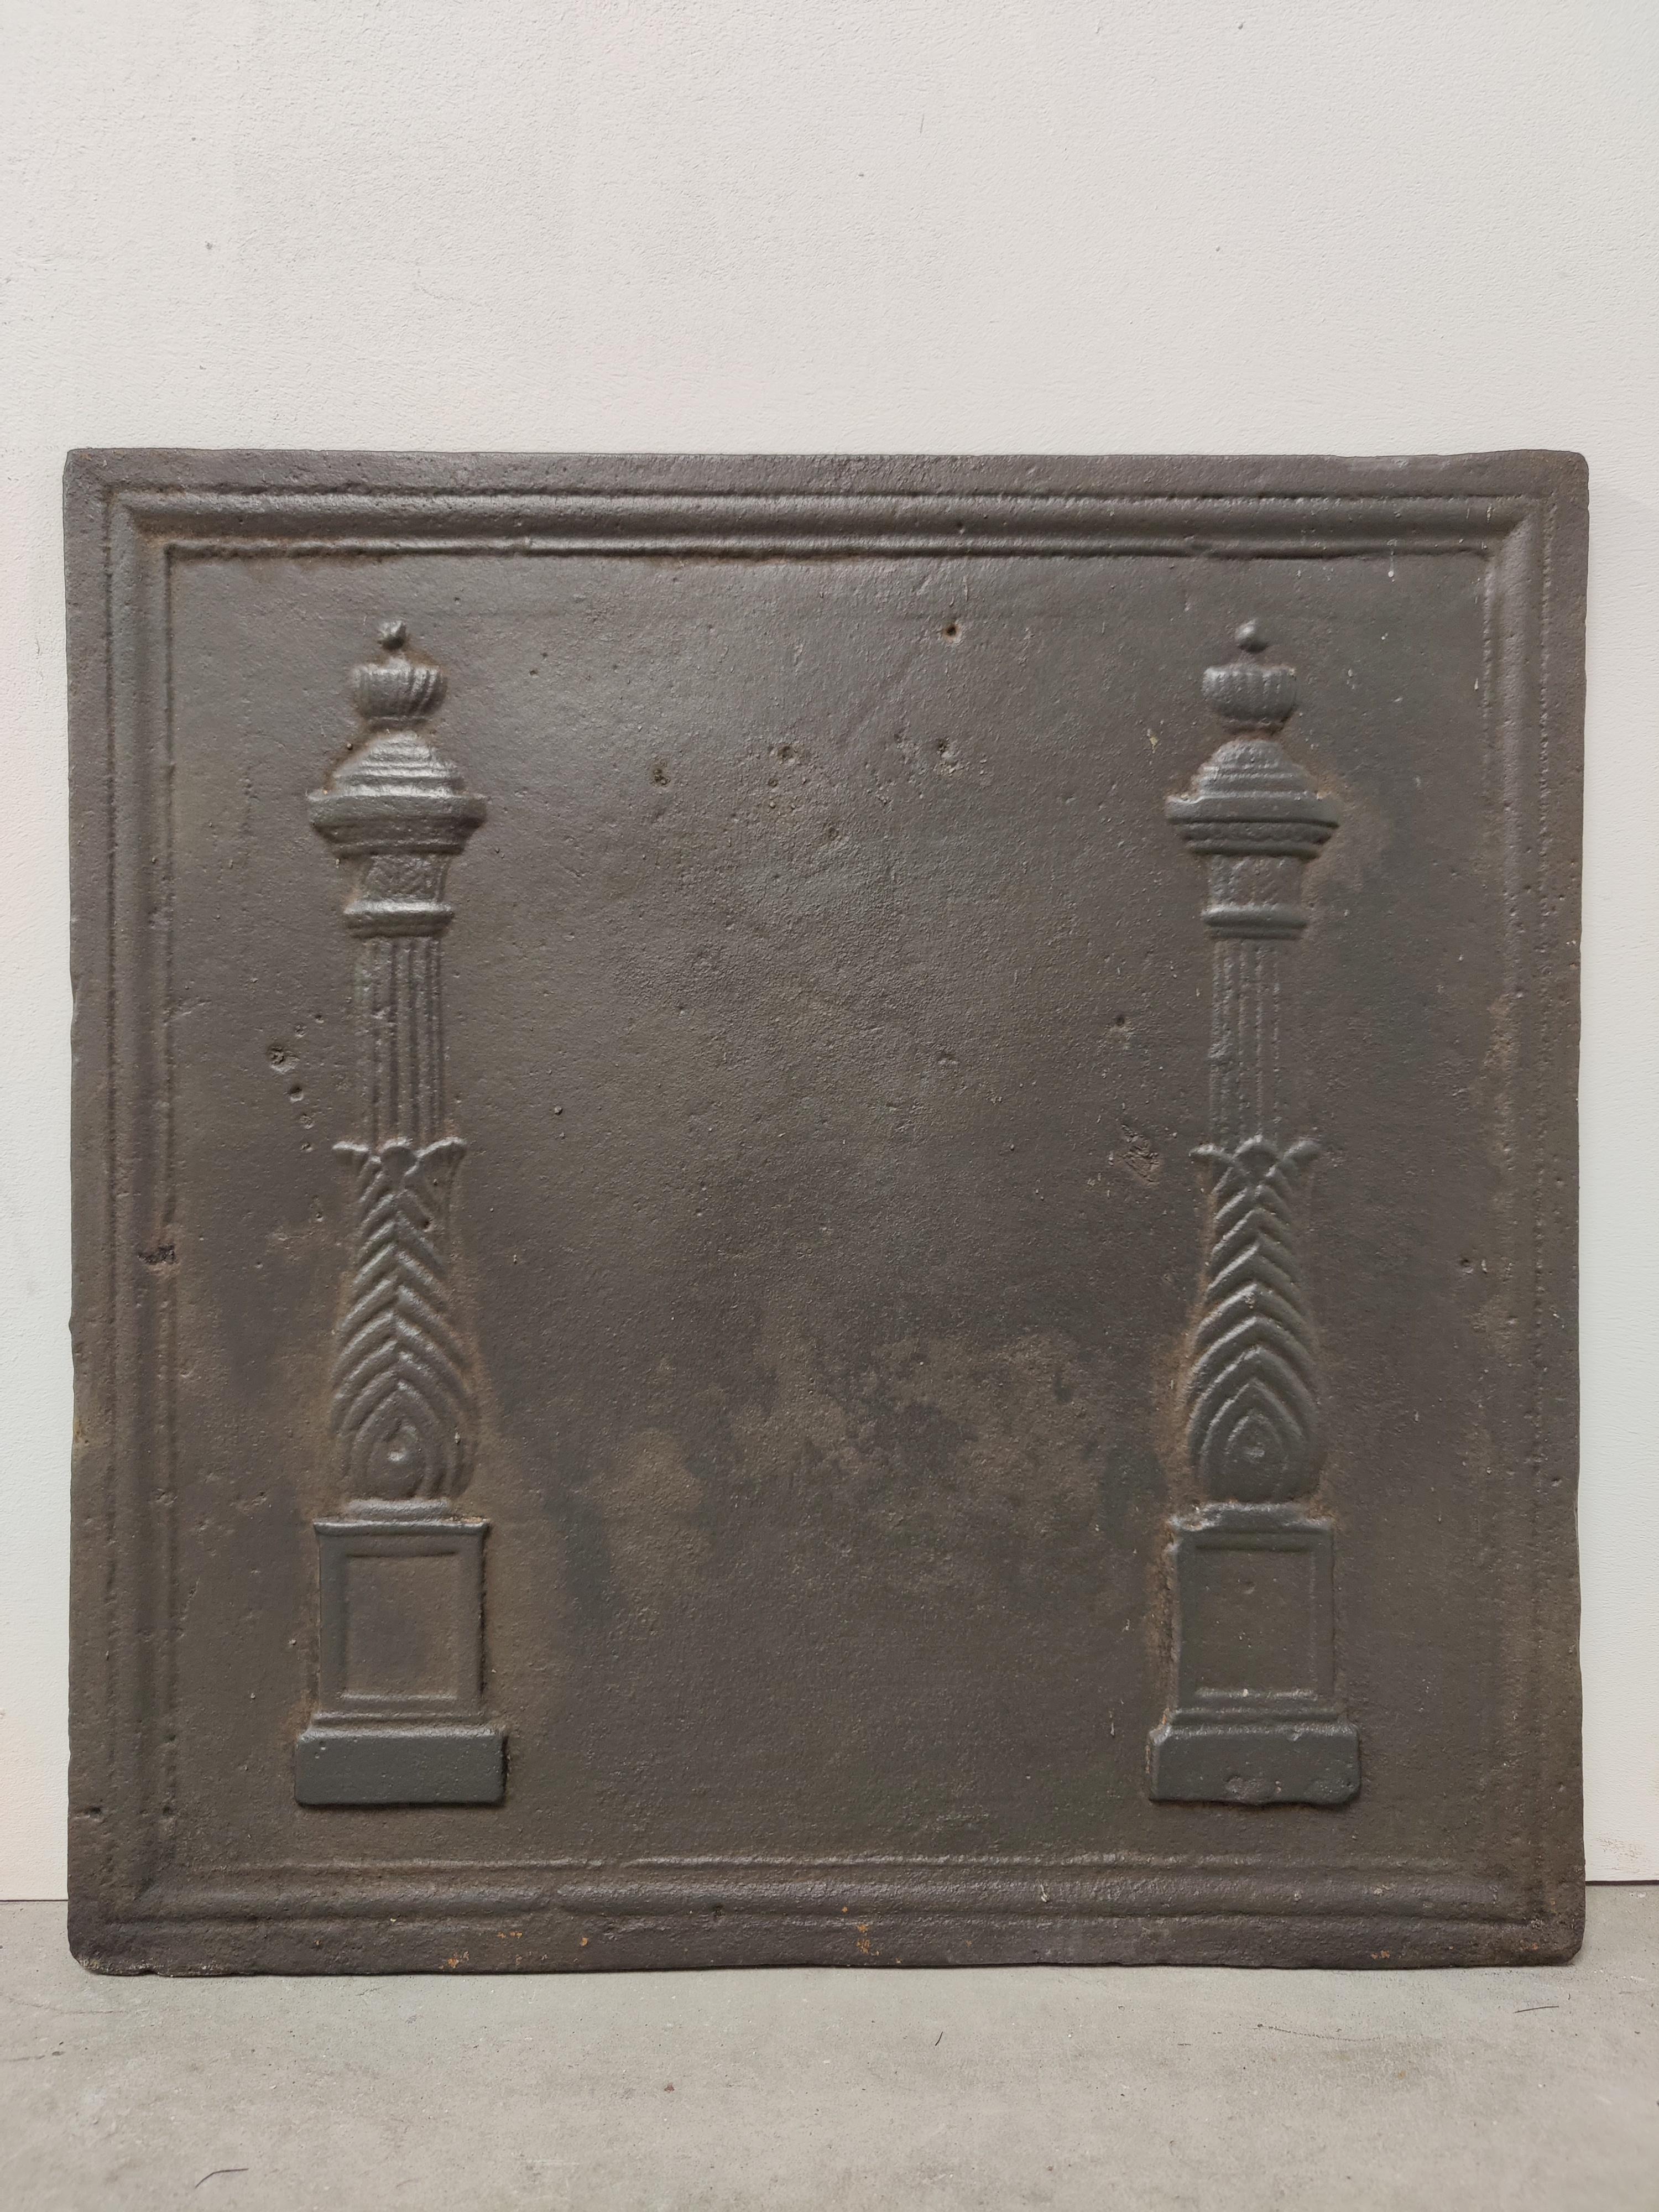 Antique fireback / backsplash, profiled pillars.

Nice square cast iron antique fireback displaying two nicely decorated profiled pillars.
Great condition, can be used in a real gas or log fire.
Very decorative piece.
42 lbs / 19 kg.

   
 